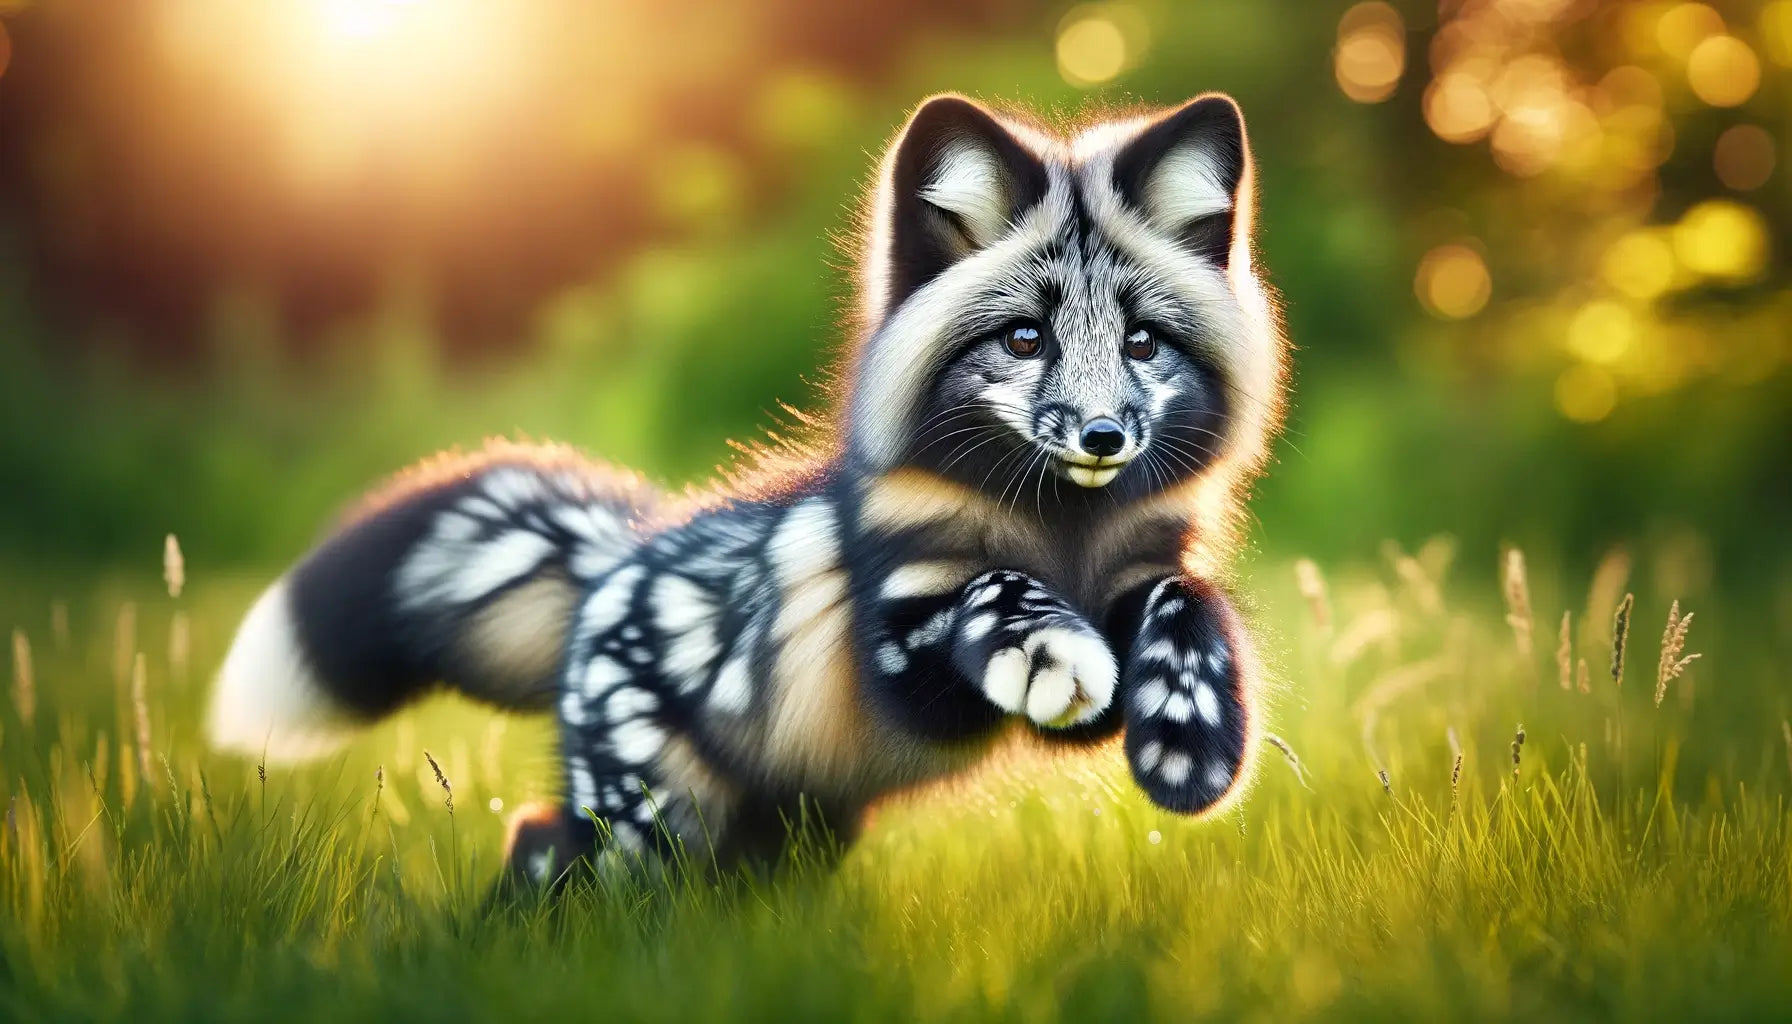 A Canadian Marble Fox in a grassy area, its coat displaying dramatic contrast between dark and light fur, with a particularly noticeable marble pattern.